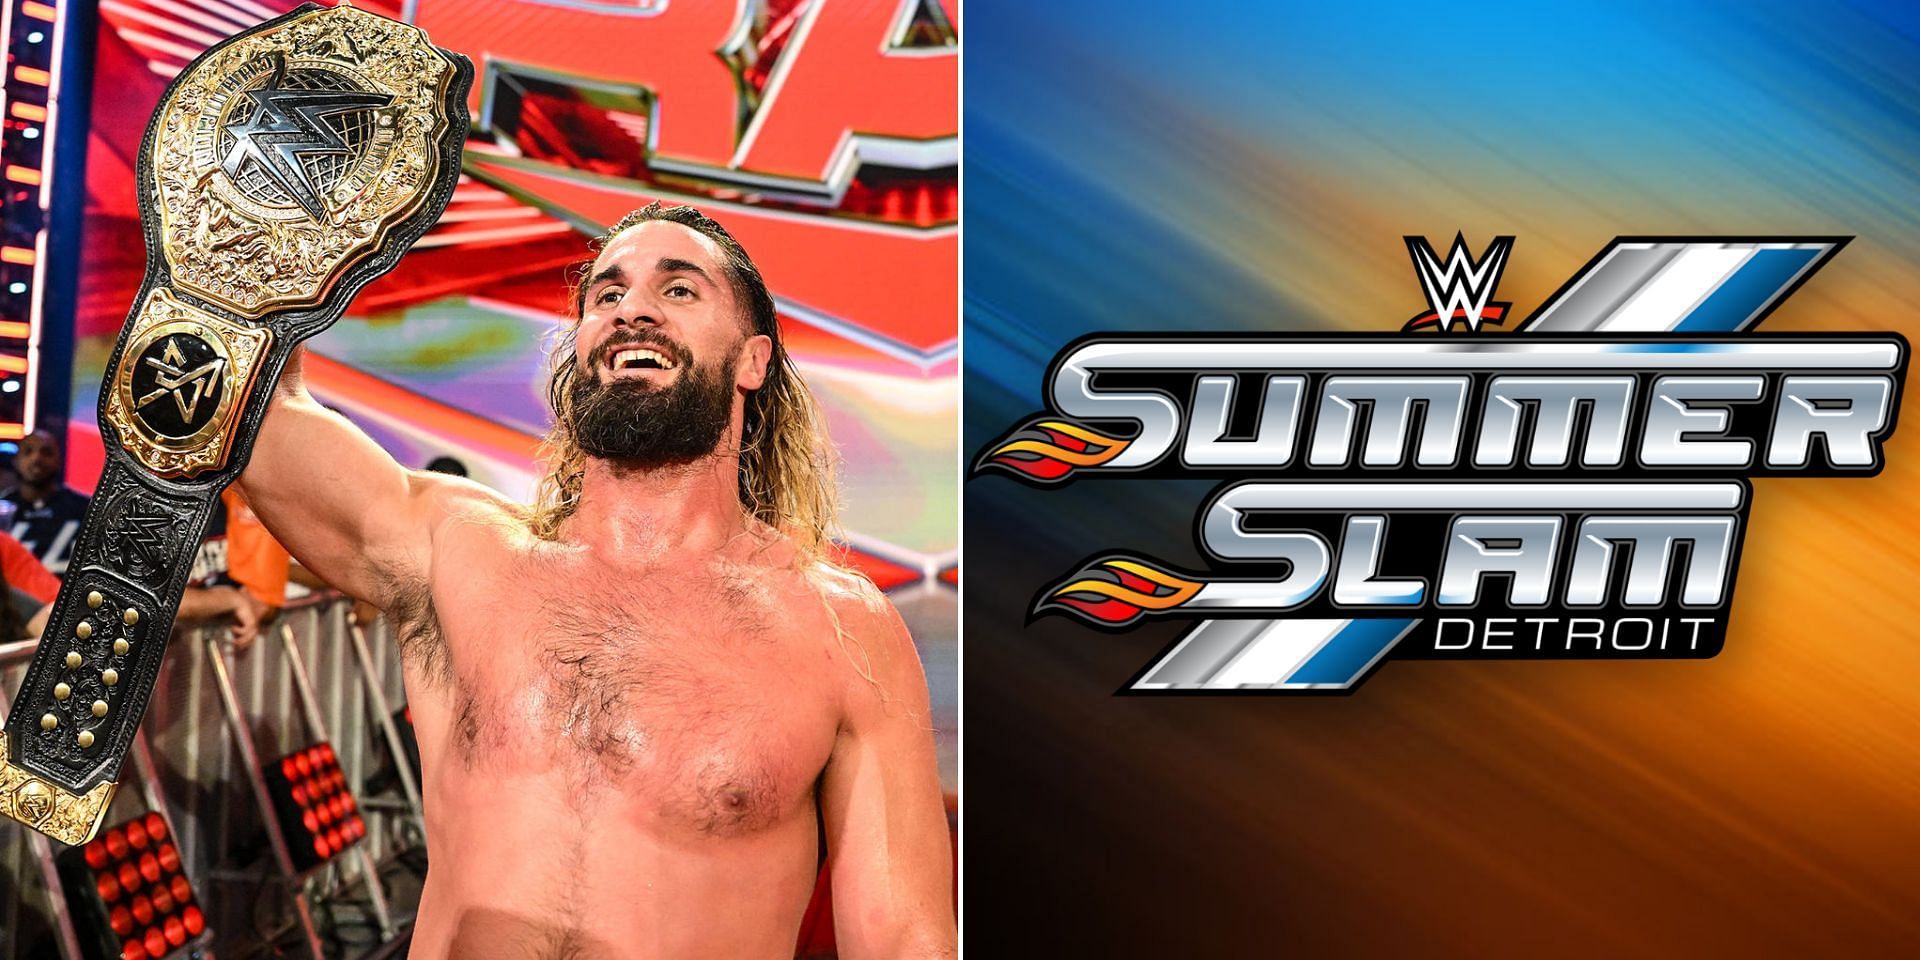 Seth Rollins will defend his title at SummerSlam